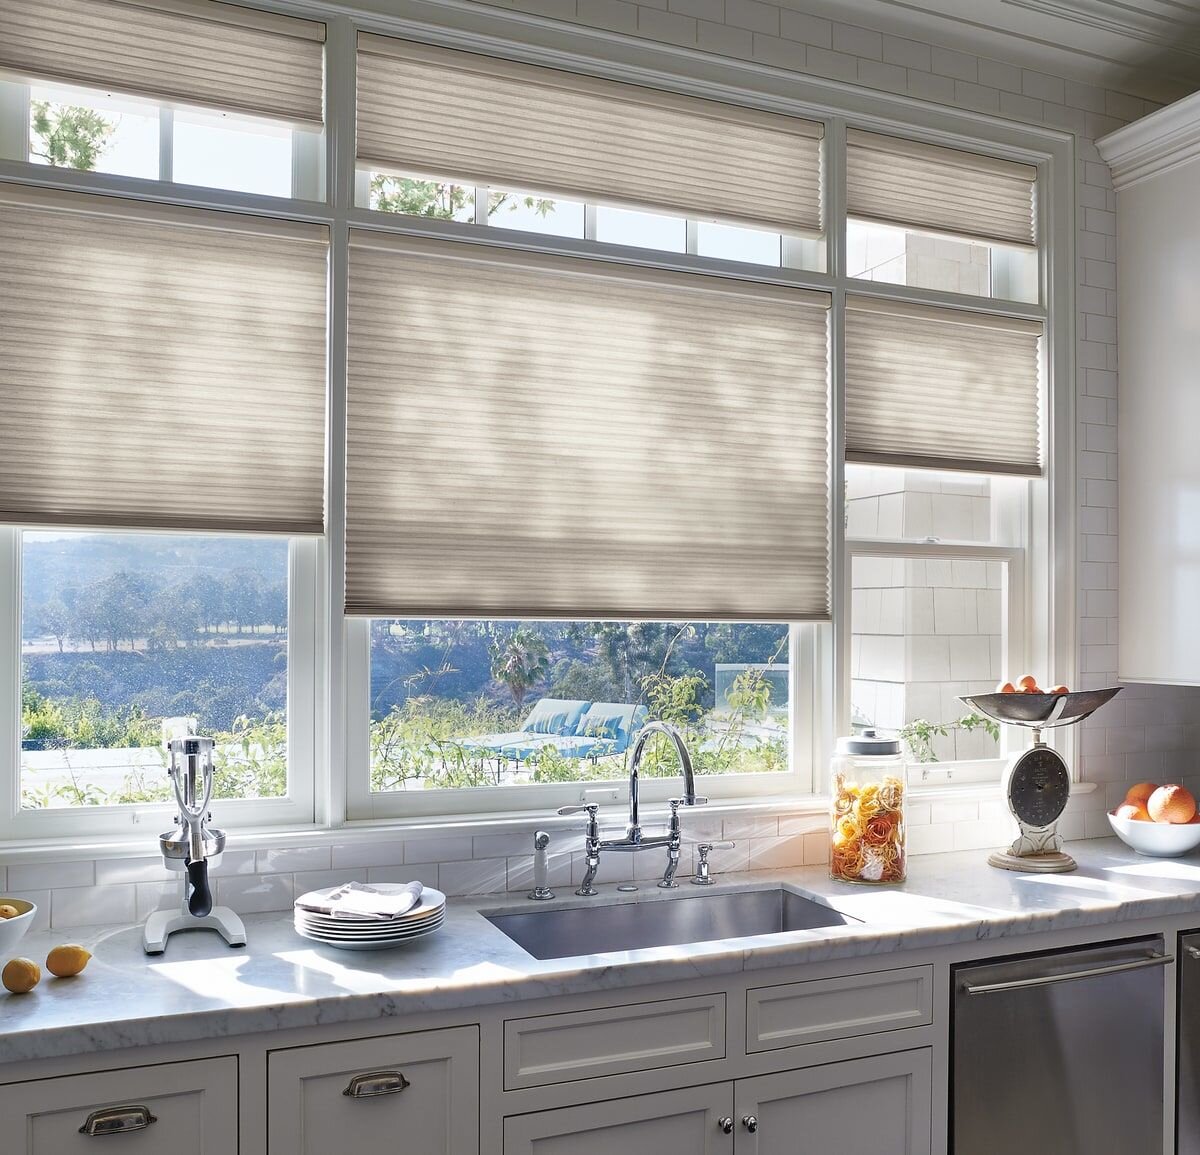 Kitchen shades for lighting and comfort